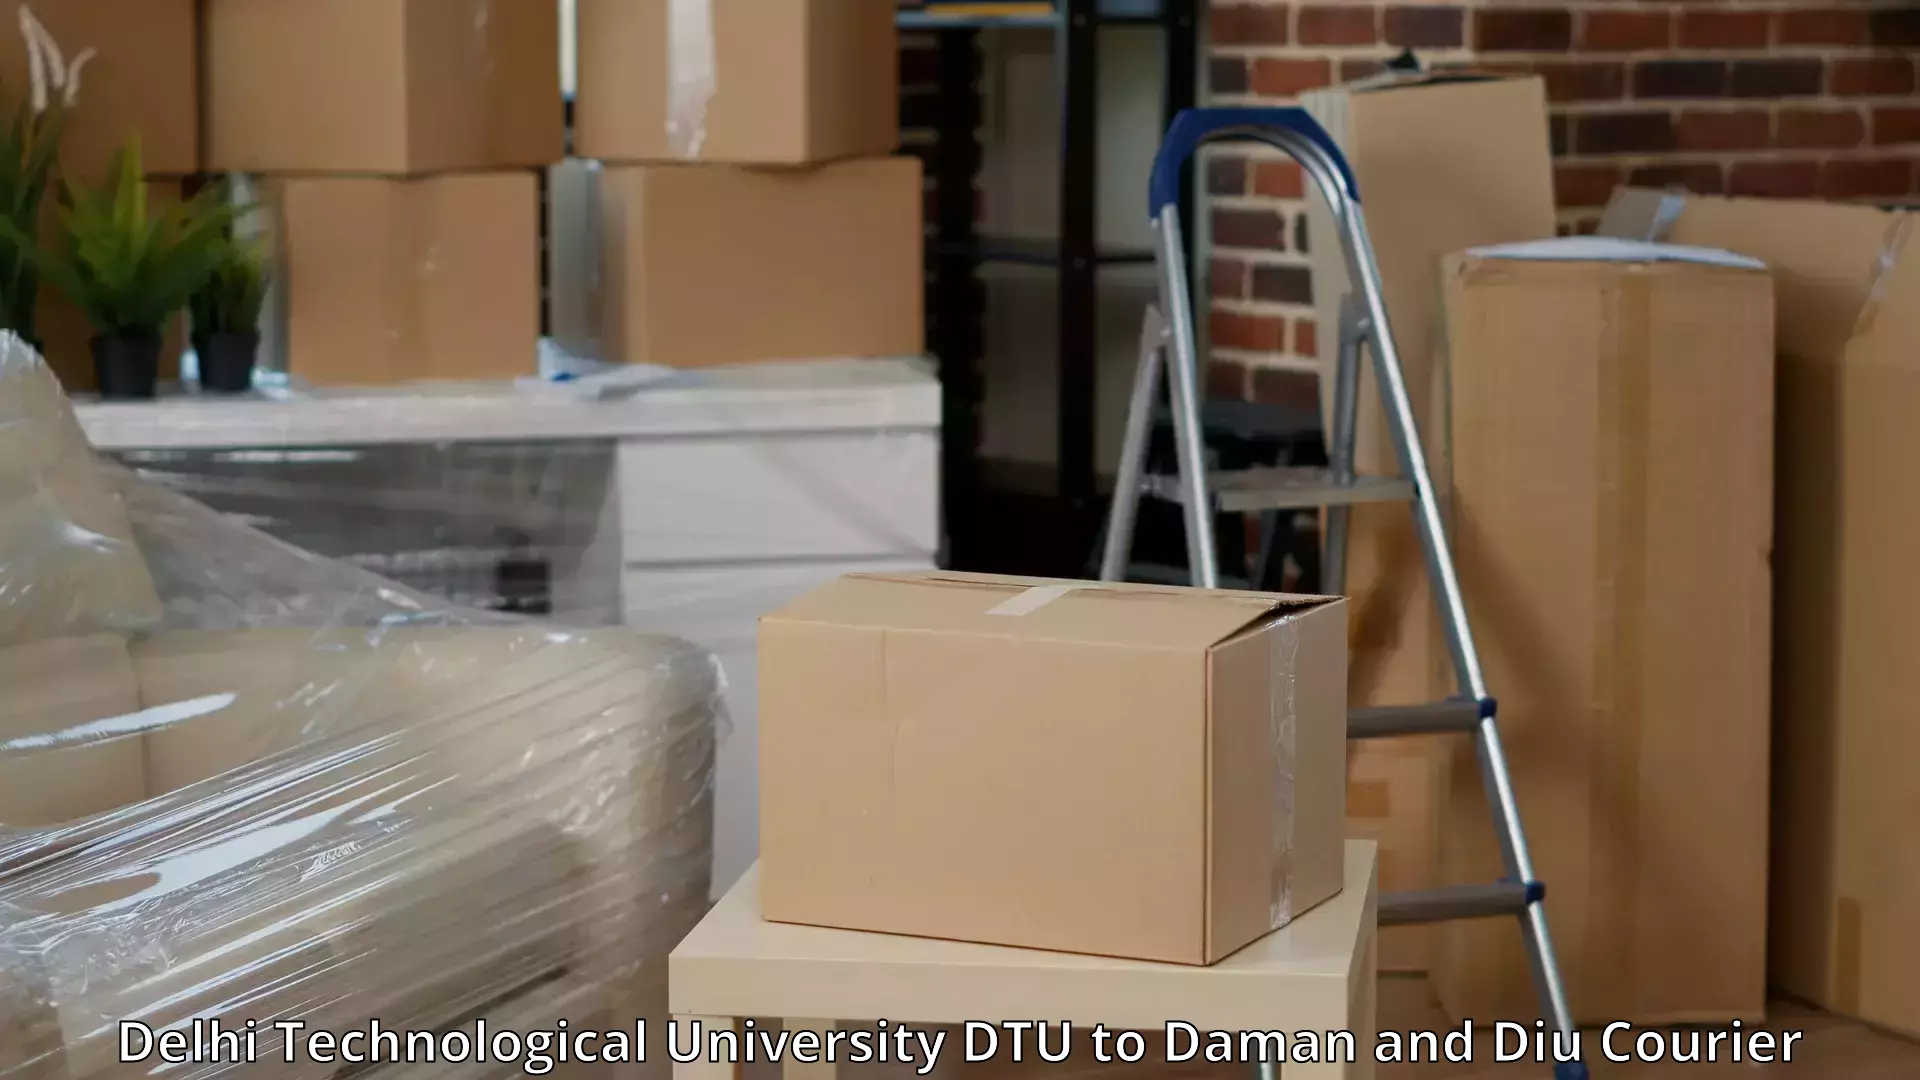 Professional movers and packers Delhi Technological University DTU to Diu